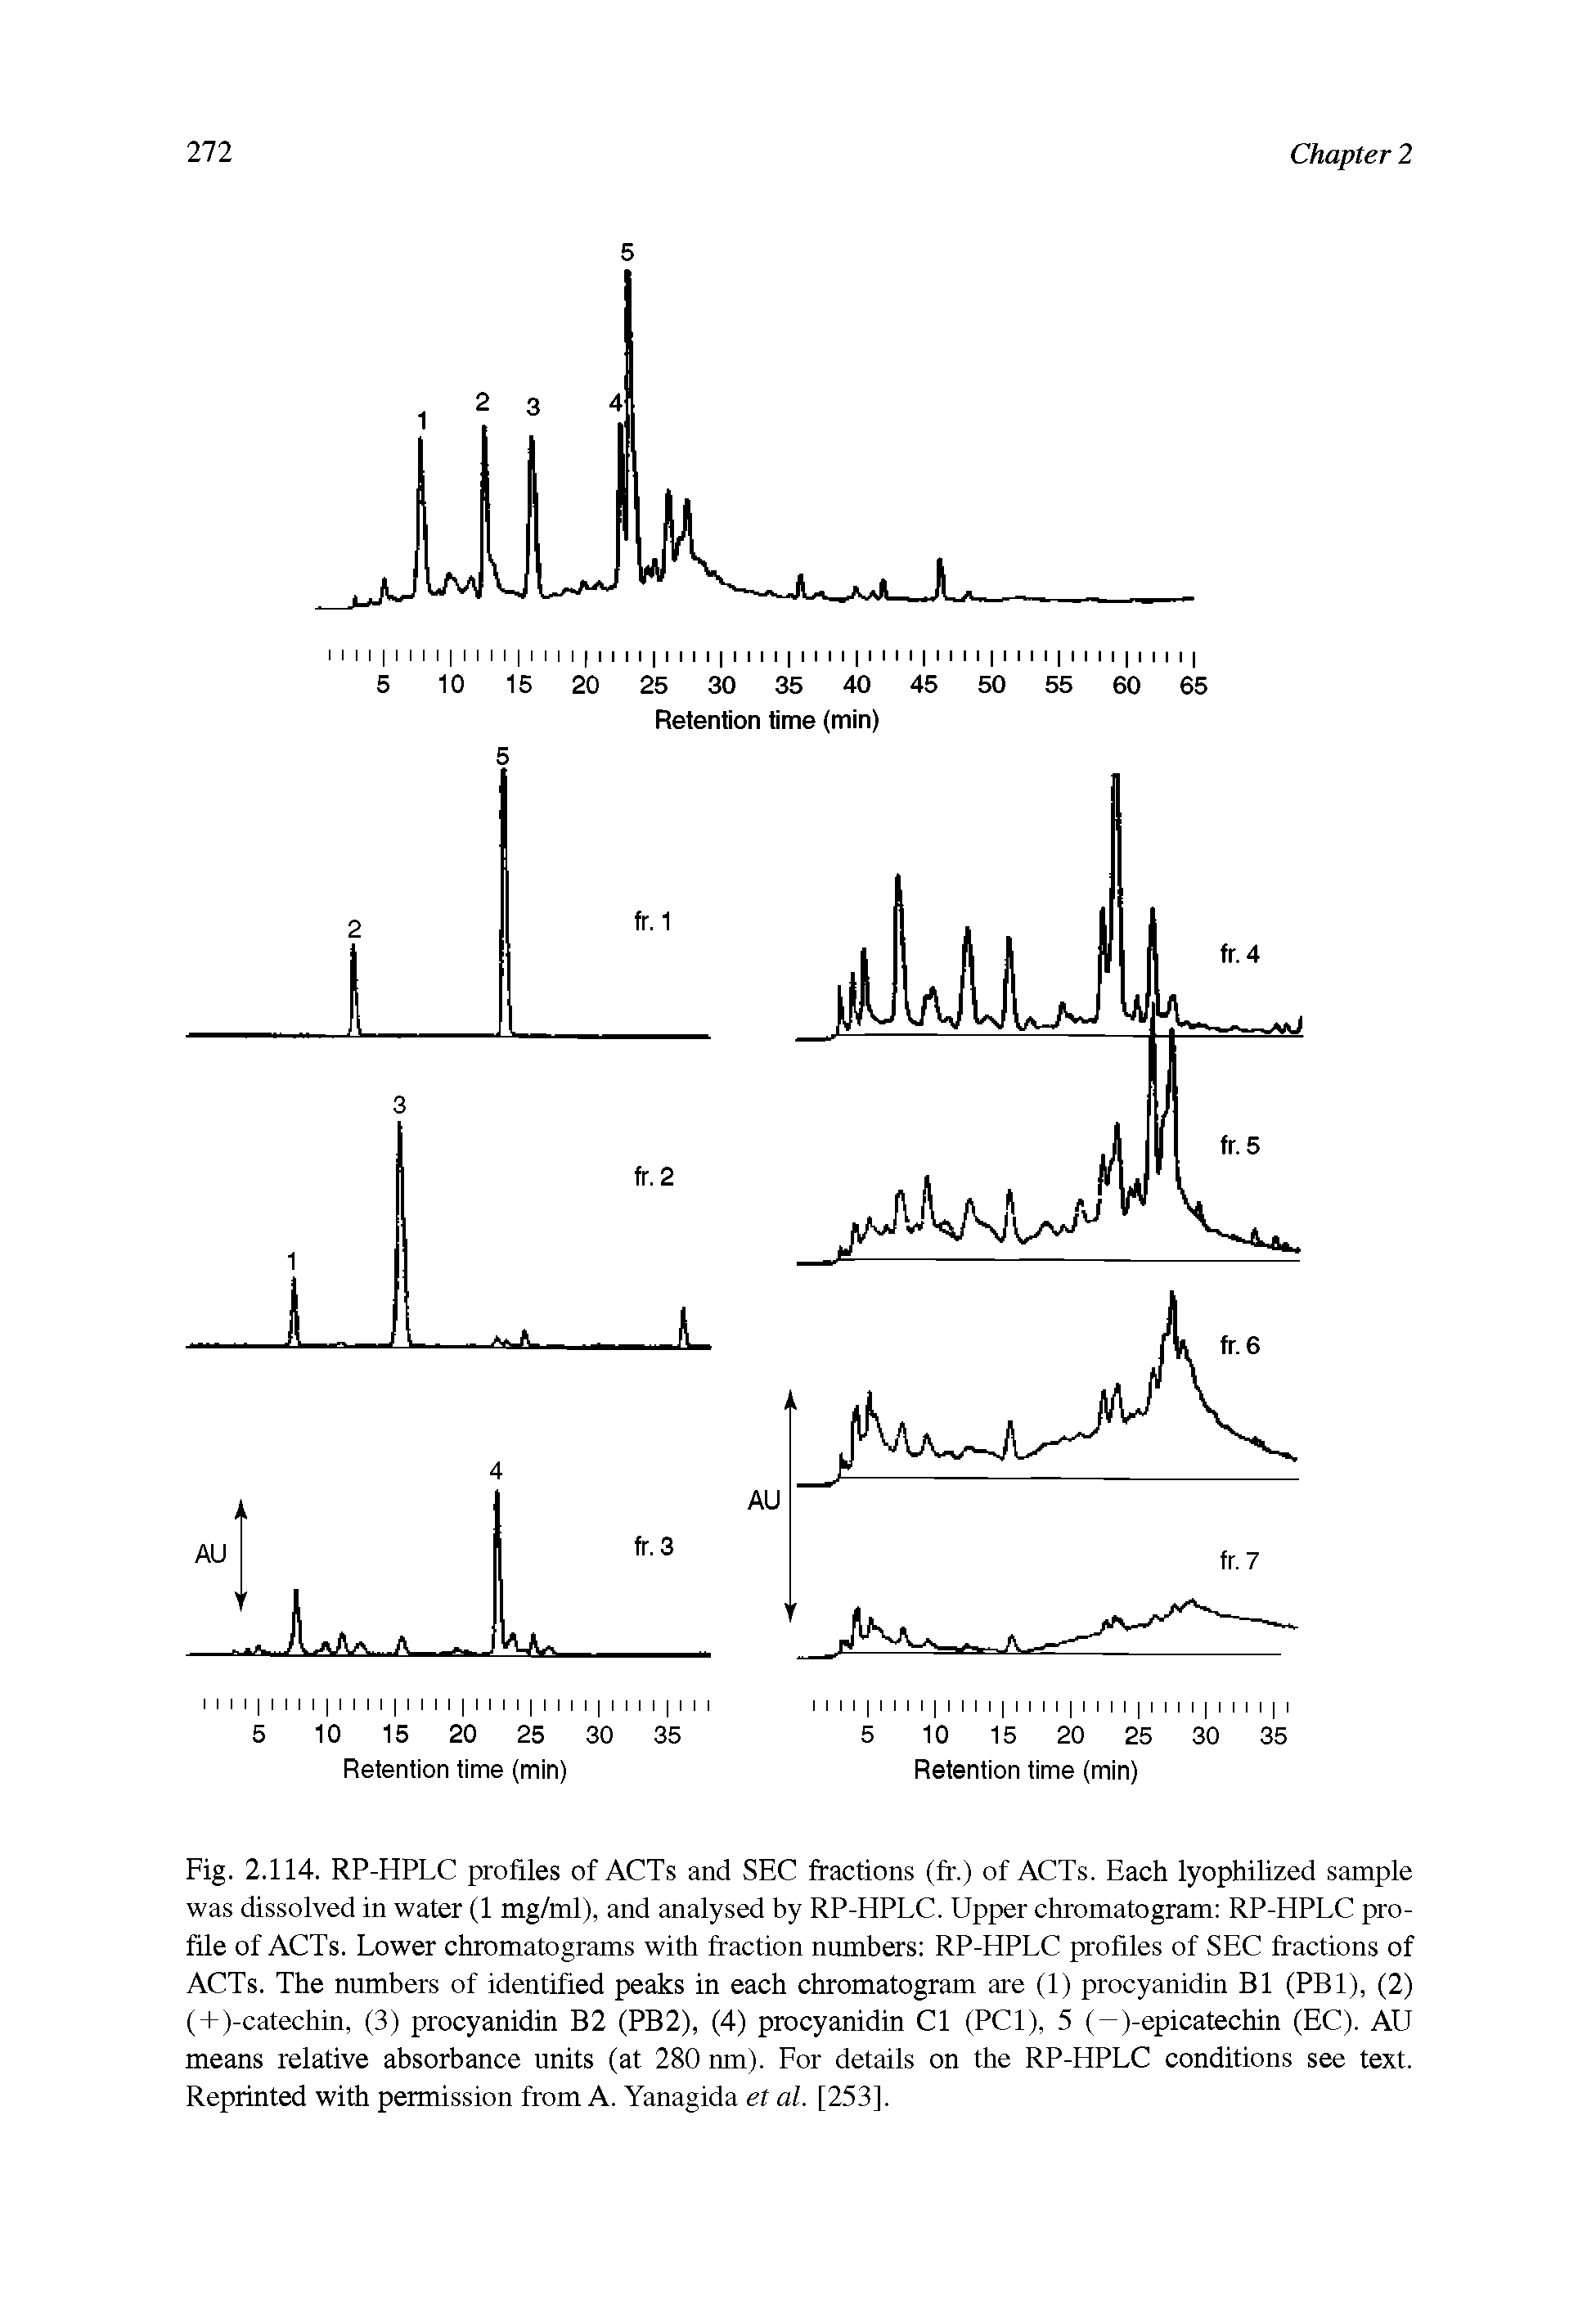 Fig. 2.114. RP-HPLC profiles of ACTs and SEC fractions (fr.) of ACTs. Each lyophilized sample was dissolved in water (1 mg/ml), and analysed by RP-HPLC. Upper chromatogram RP-HPLC profile of ACTs. Lower chromatograms with fraction numbers RP-HPLC profiles of SEC fractions of ACTs. The numbers of identified peaks in each chromatogram are (1) procyanidin B1 (PB1), (2) (+)-catechin, (3) procyanidin B2 (PB2), (4) procyanidin Cl (PCI), 5 (—)-epicatechin (EC). AU means relative absorbance units (at 280 nm). For details on the RP-HPLC conditions see text. Reprinted with permission from A. Yanagida et al. [253].